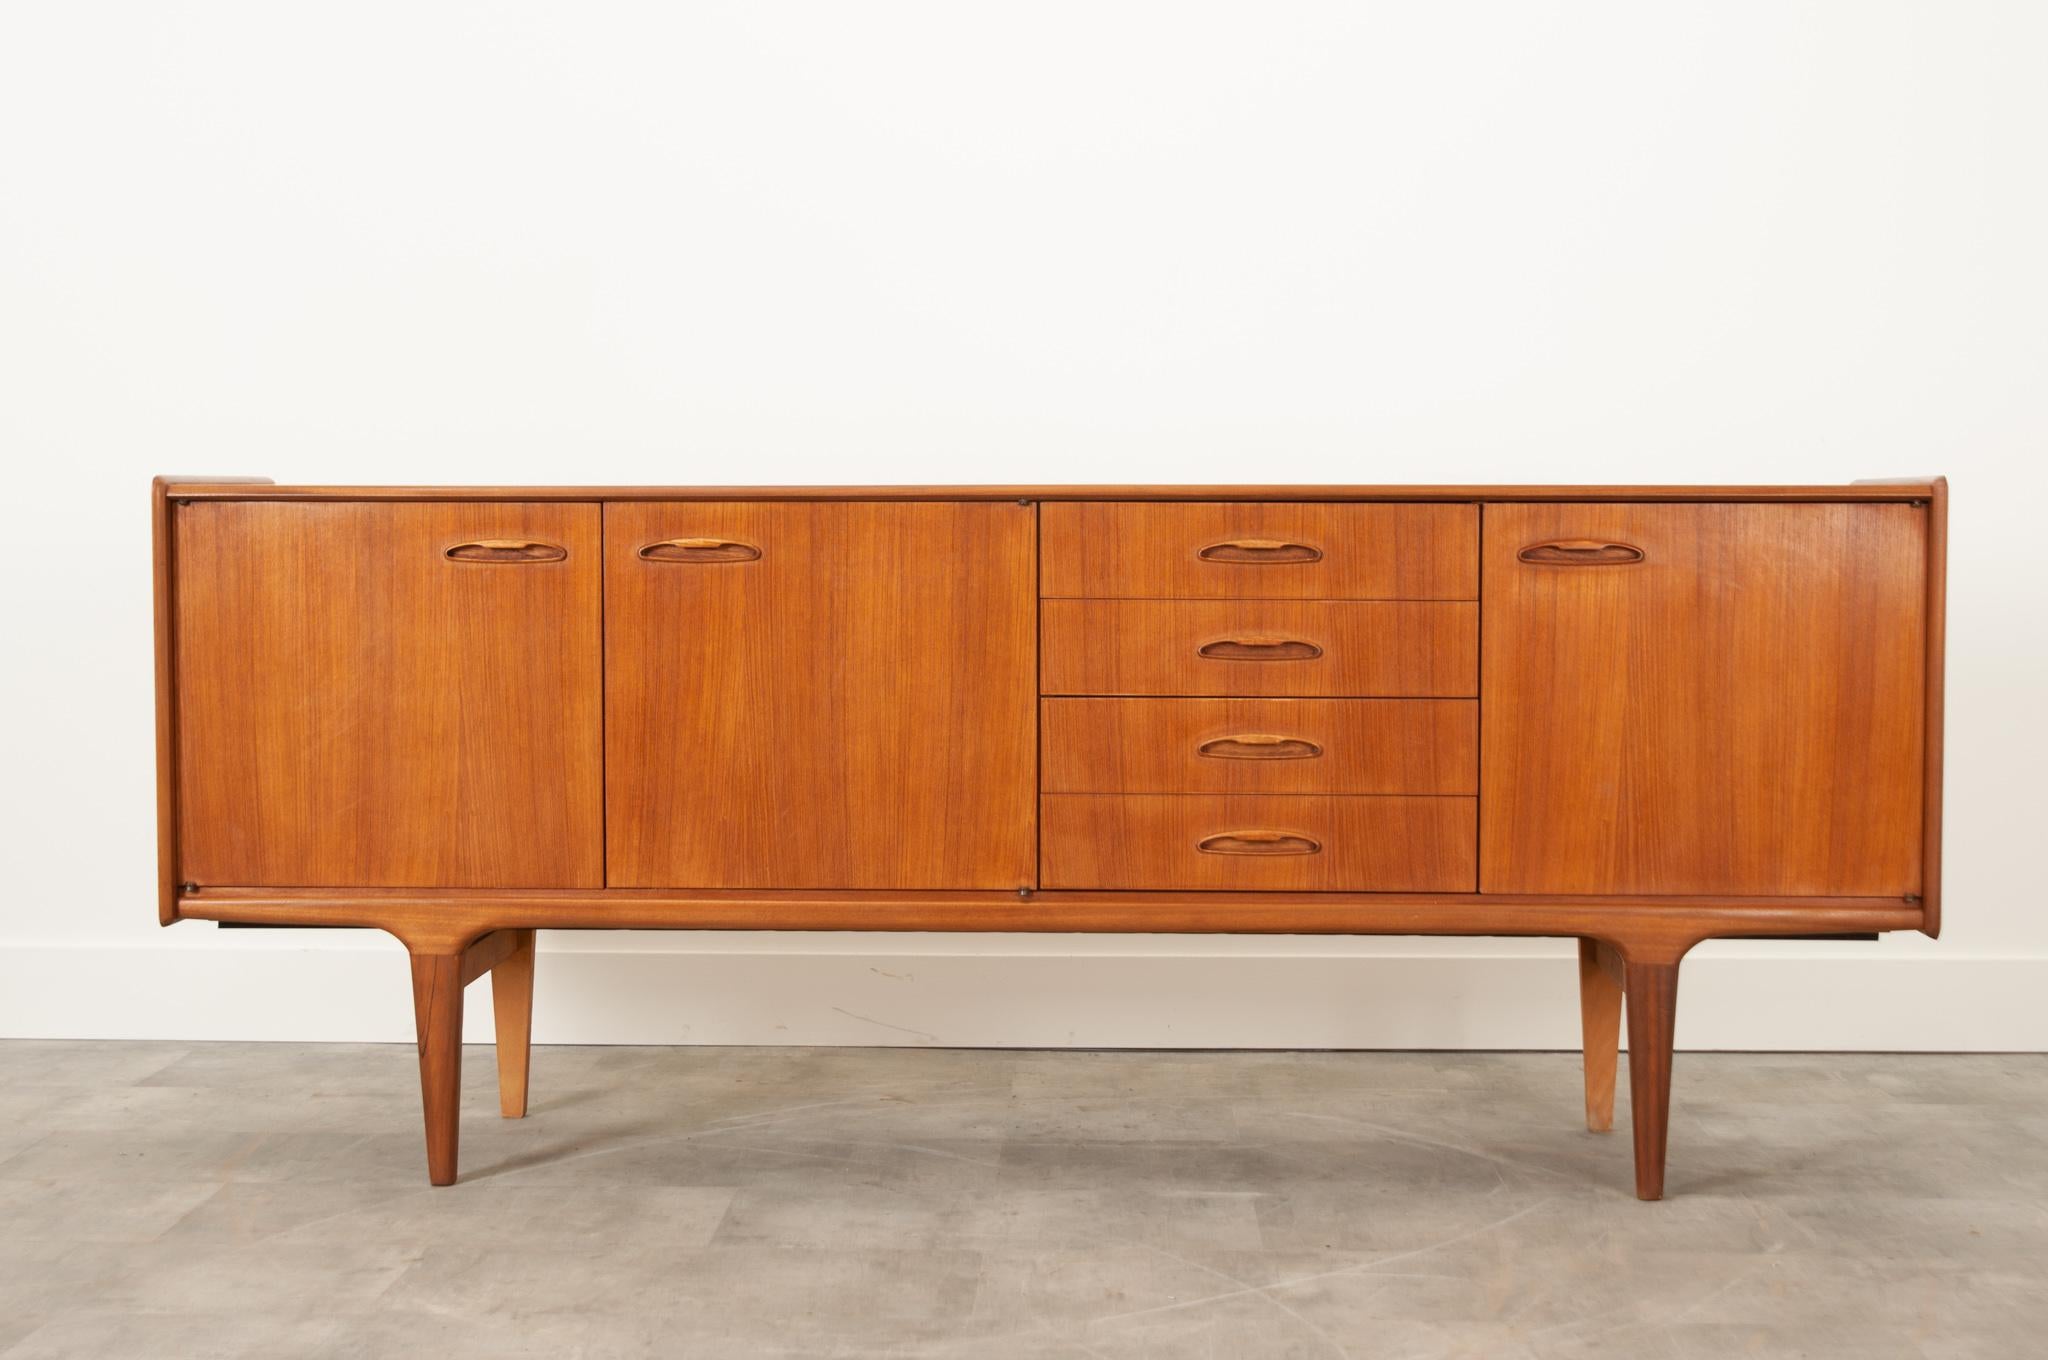 A sizable mid-century modern sideboard from France with a sleek, uncluttered design.  Vibrant mahogany with classic mid century modern elements make this a versatile piece. A bank of four drawers provide plenty of organized storage- the top drawer